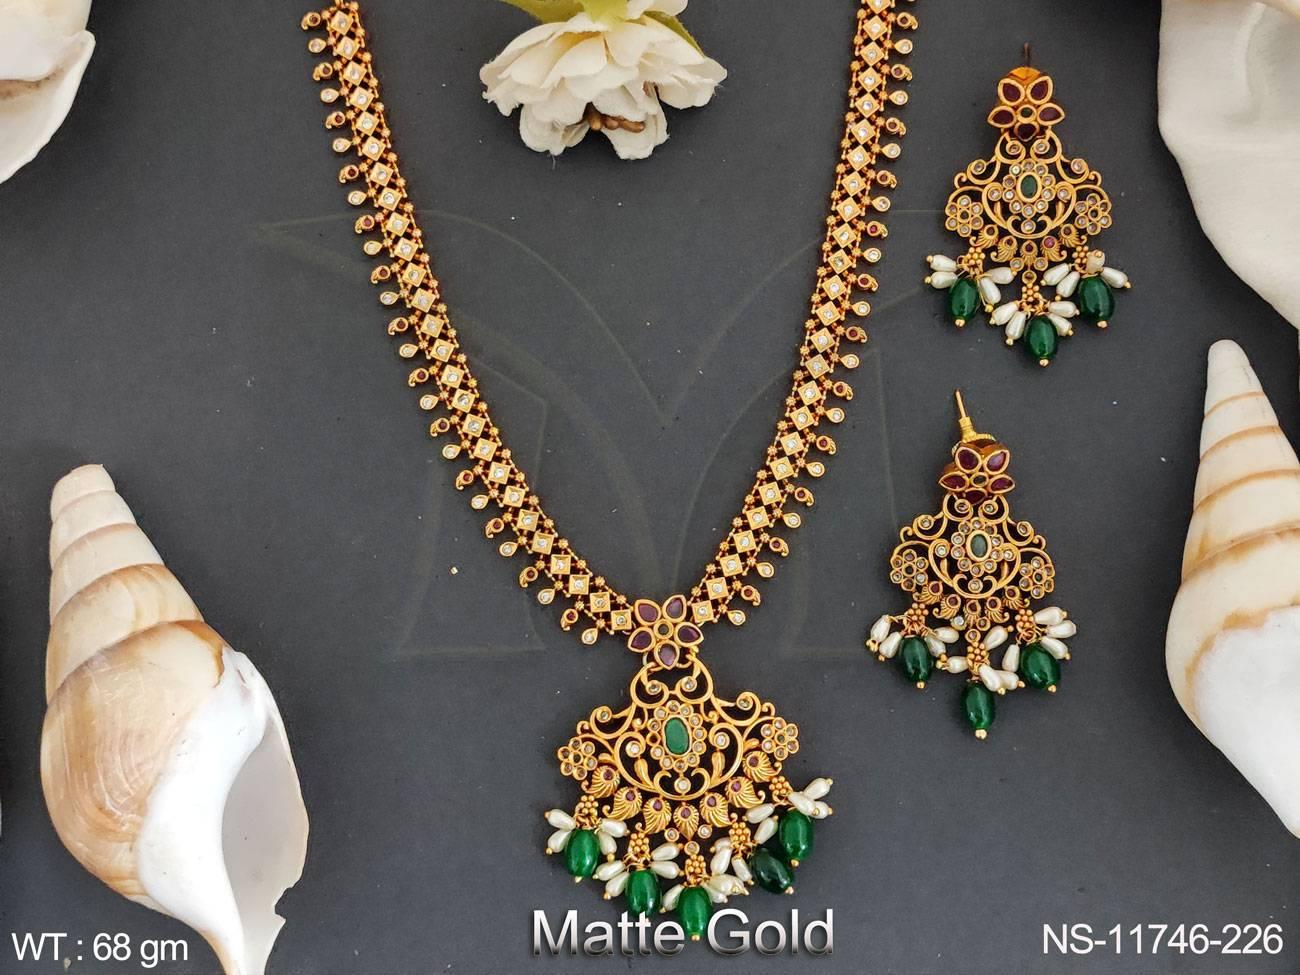 This Fancy Style Party wear Matte Gold Polish jewellery set features a beautiful kemp-studded long necklace that will add a touch of elegance to any look.